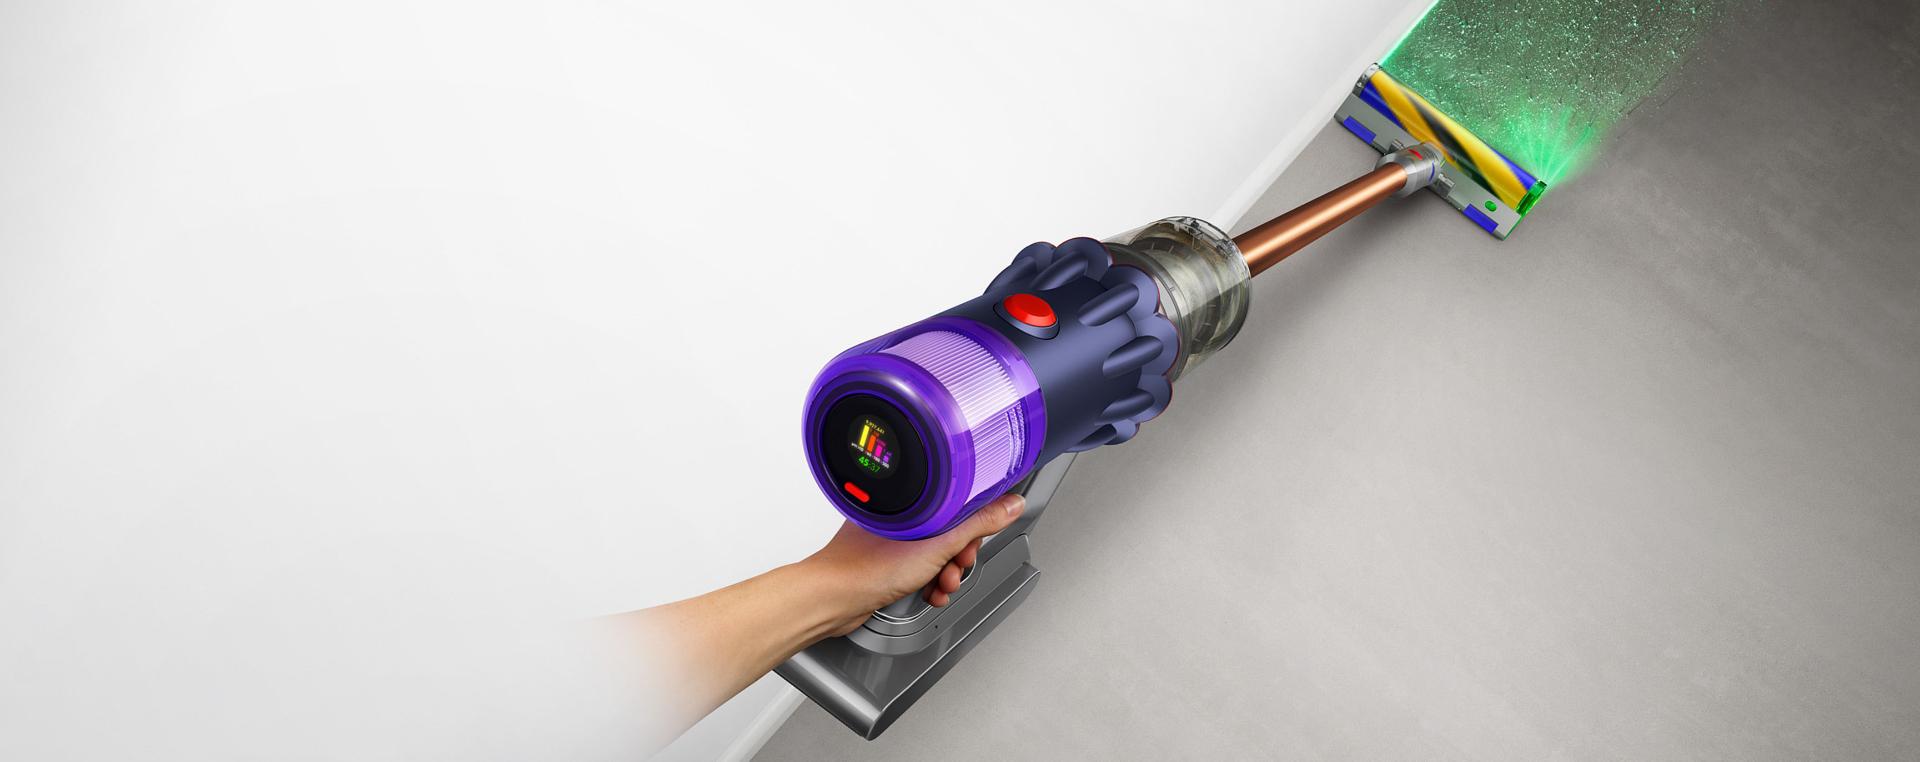 The Dyson V12 Detect Slim emitting a green blade of light from its Fluffy Optic cleaner head.